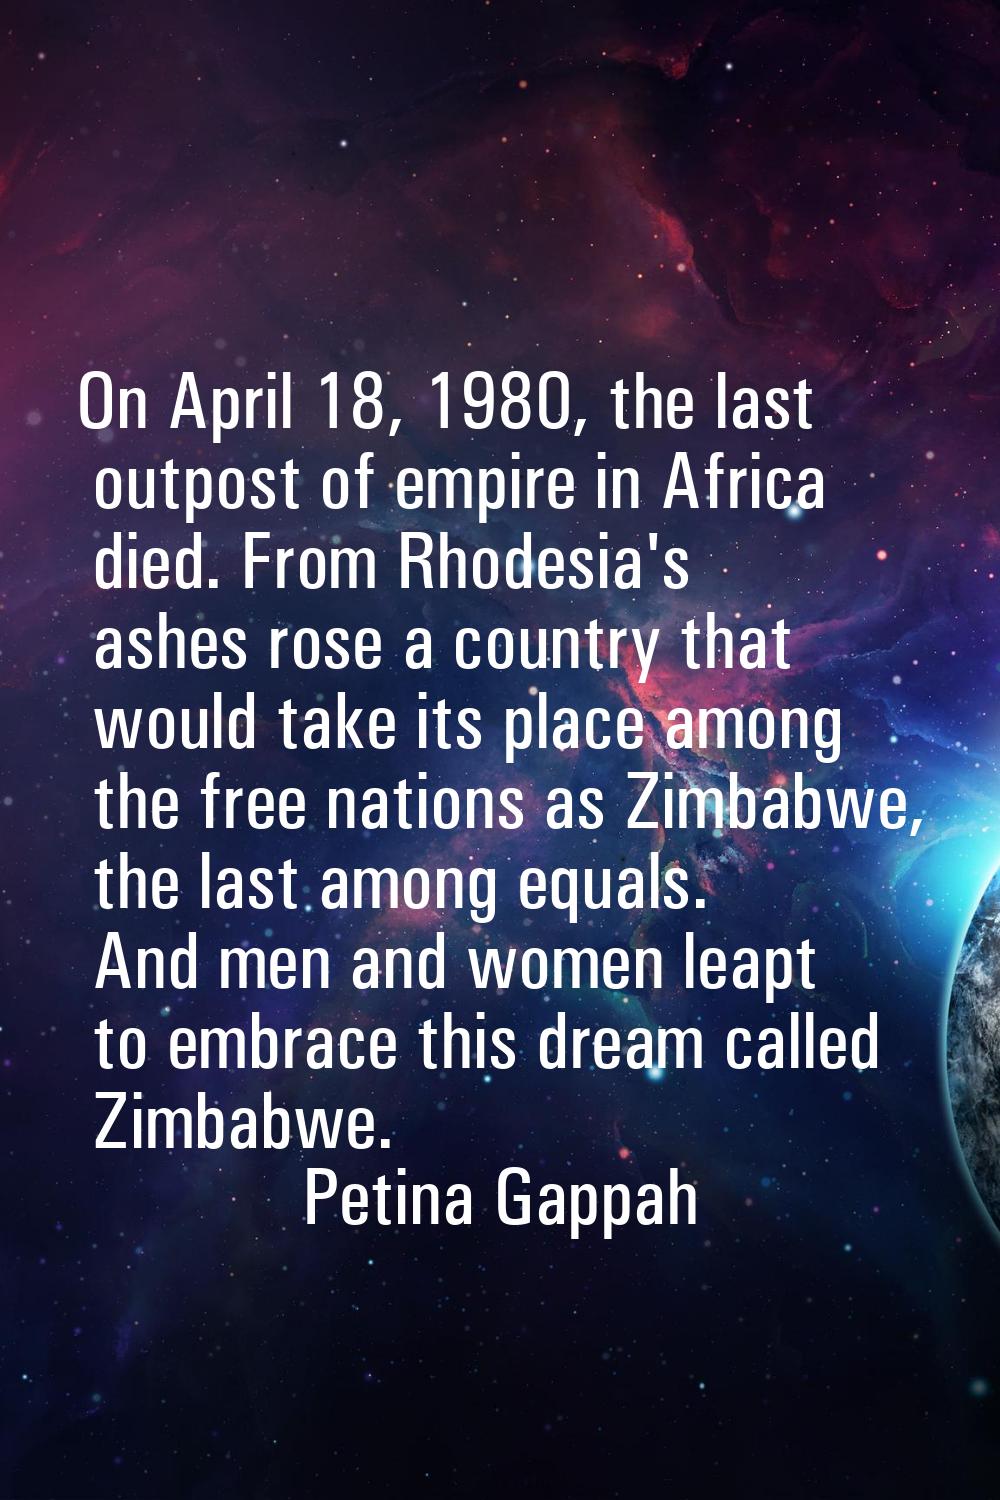 On April 18, 1980, the last outpost of empire in Africa died. From Rhodesia's ashes rose a country 